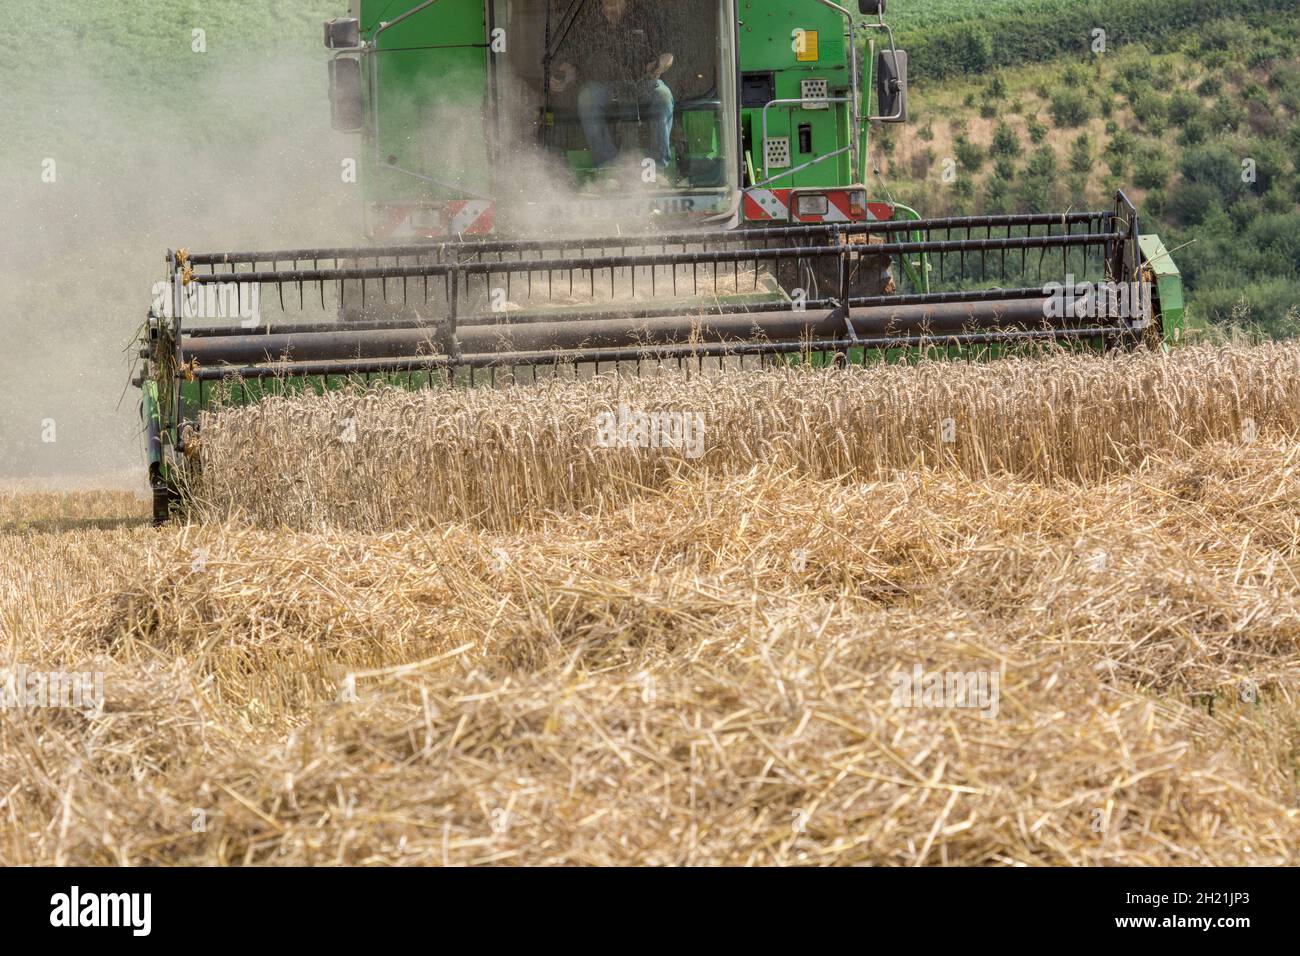 Combine harvester cutting ripe wheat crop - on sloping ground / field. Metaphor food security / growing food, UK farming and agriculture, wheat supply Stock Photo